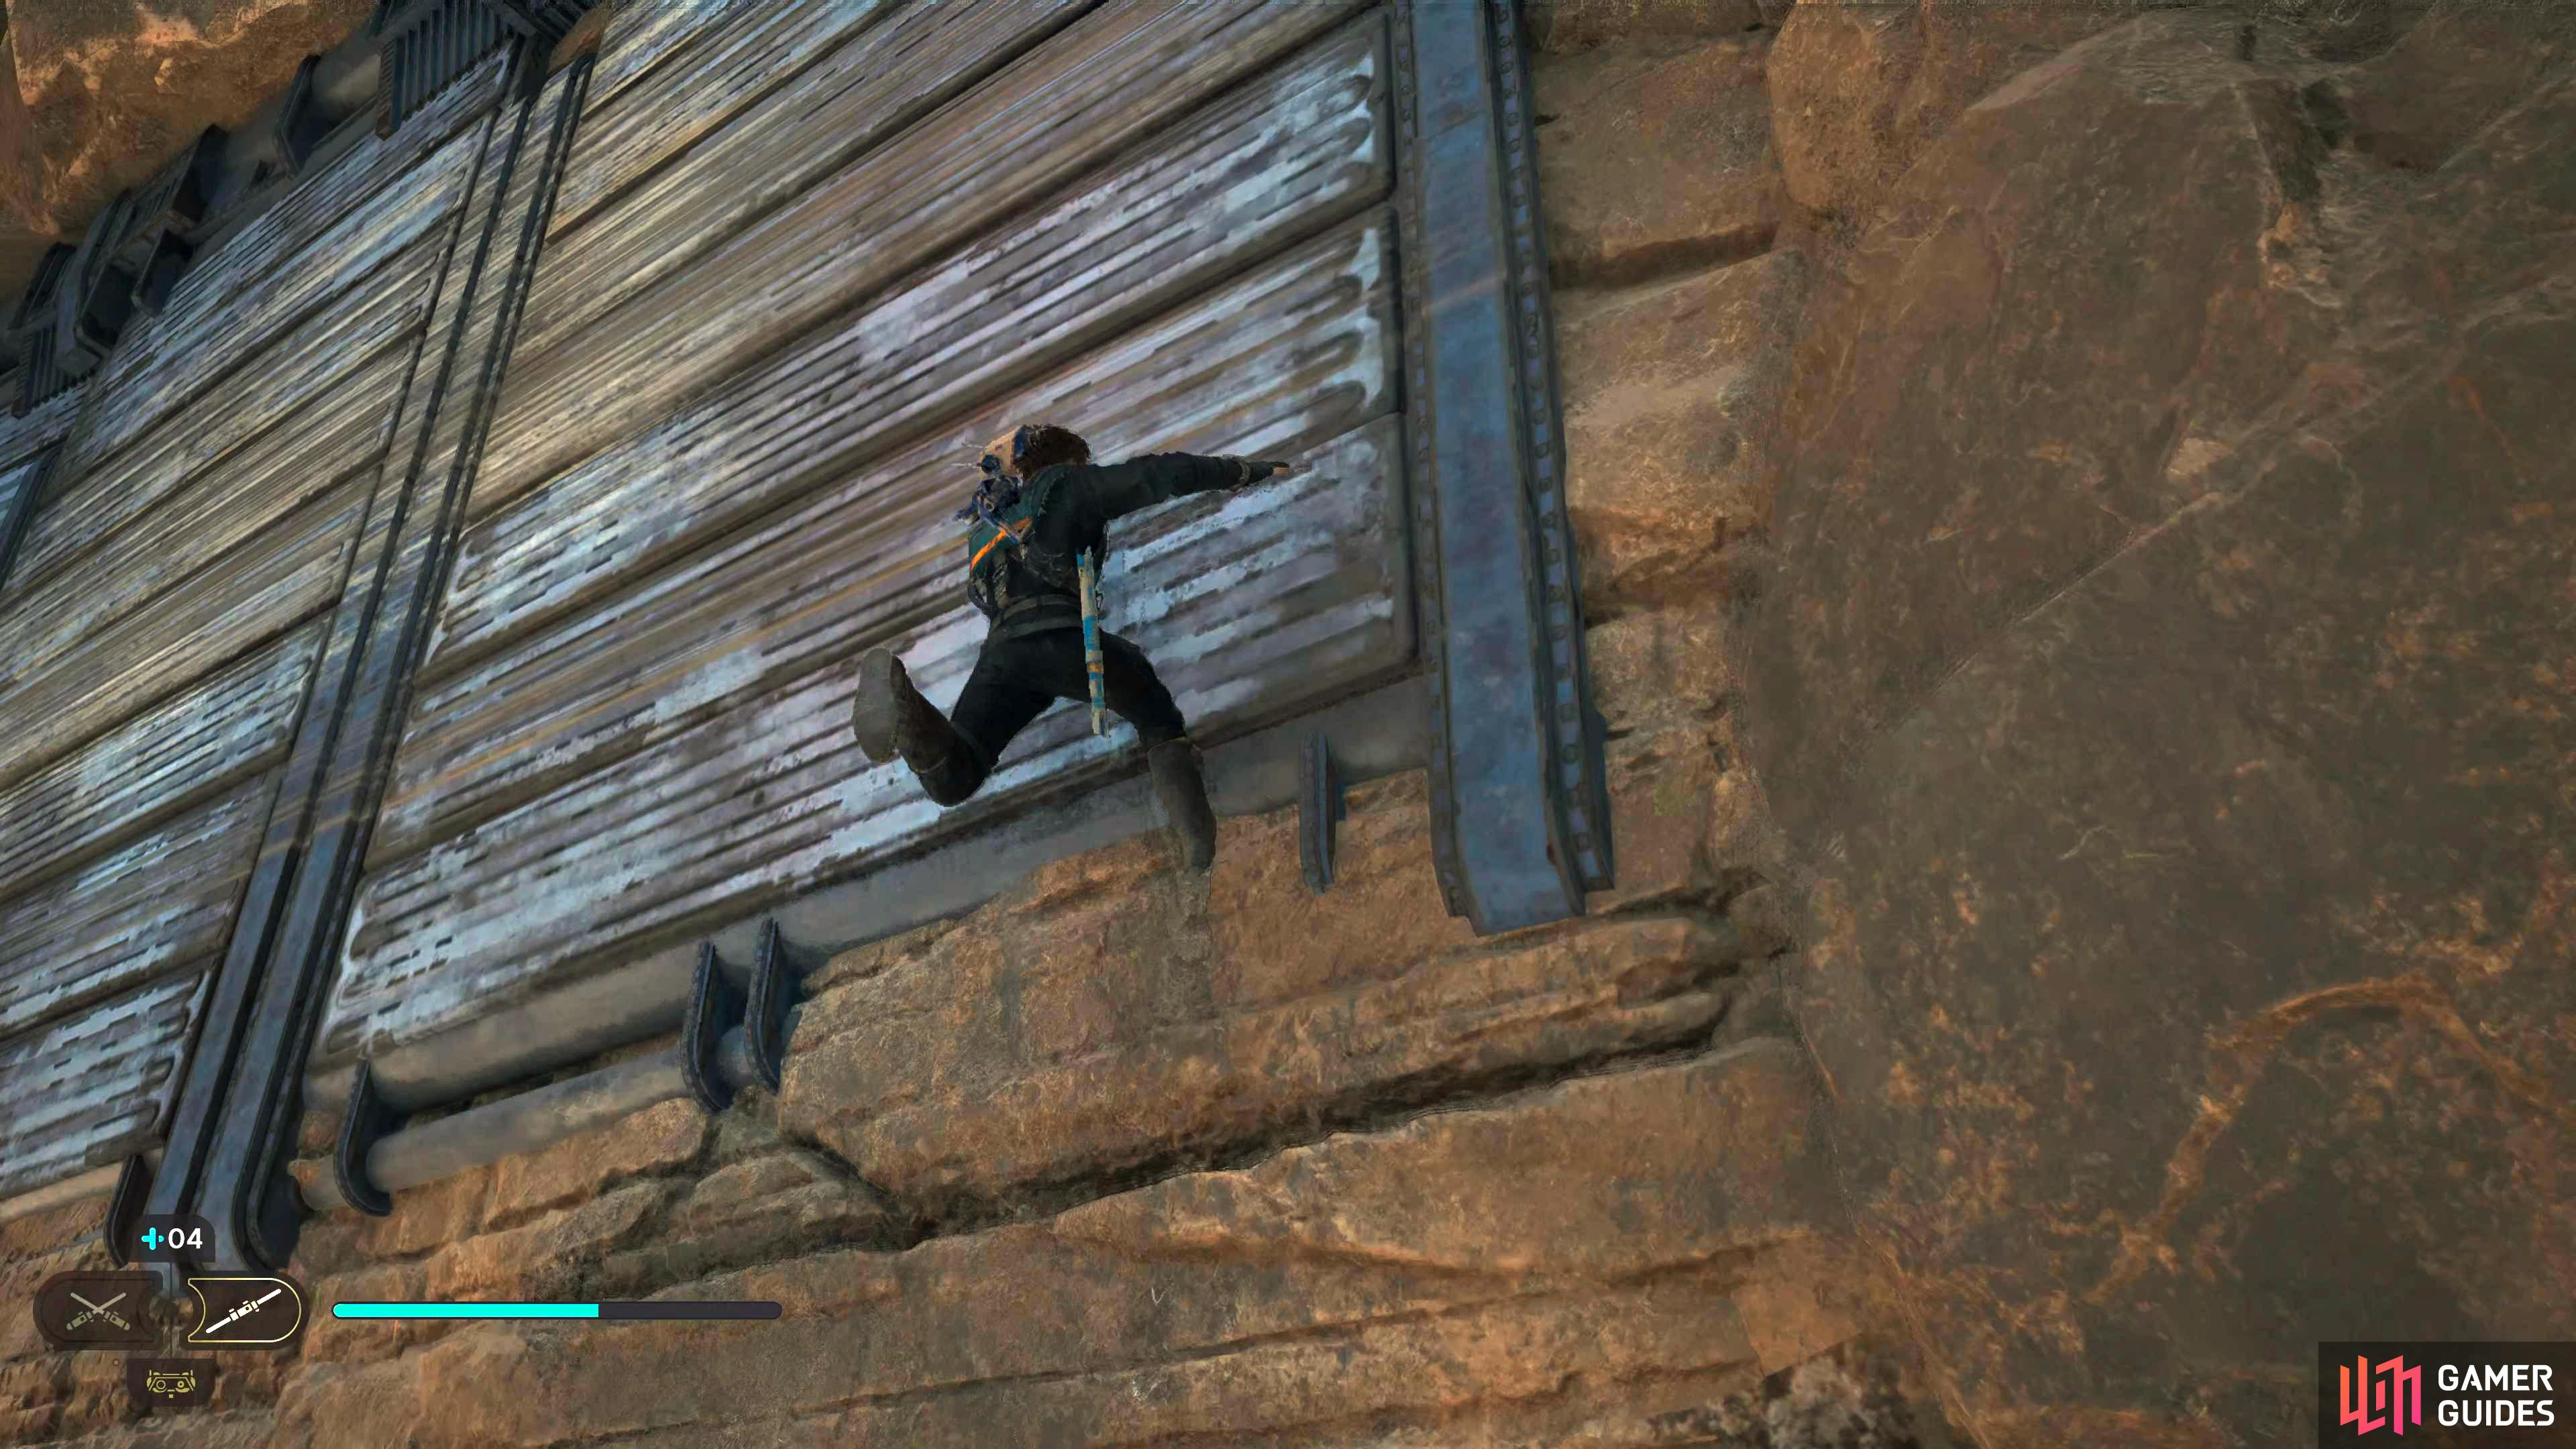 Ride the mount to the wall behind the shack, and double jump on the wall to wall-run onto the ledge.